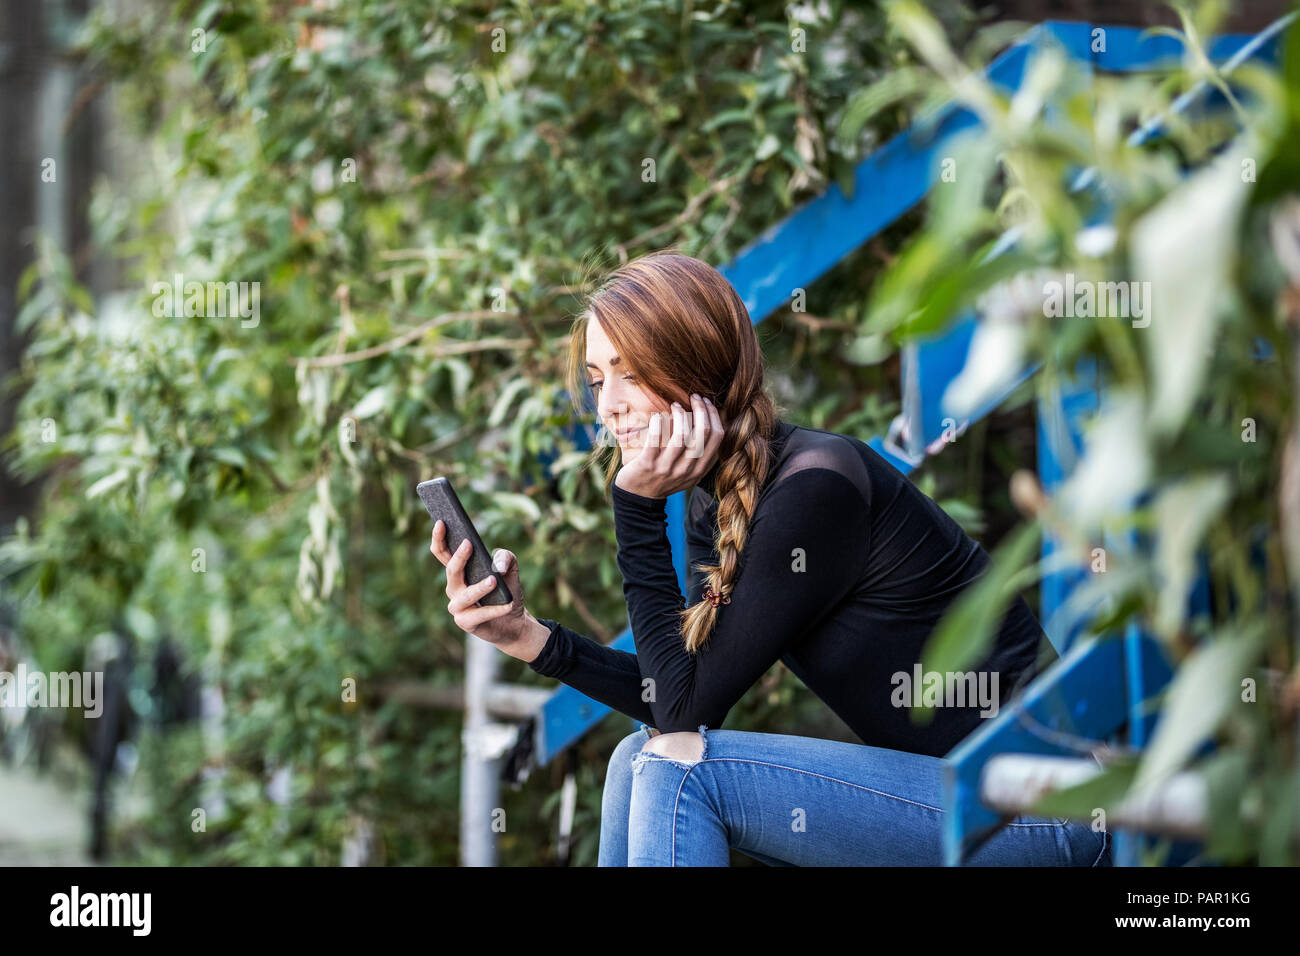 Smiling woman sitting on stairs looking at smartphone Banque D'Images